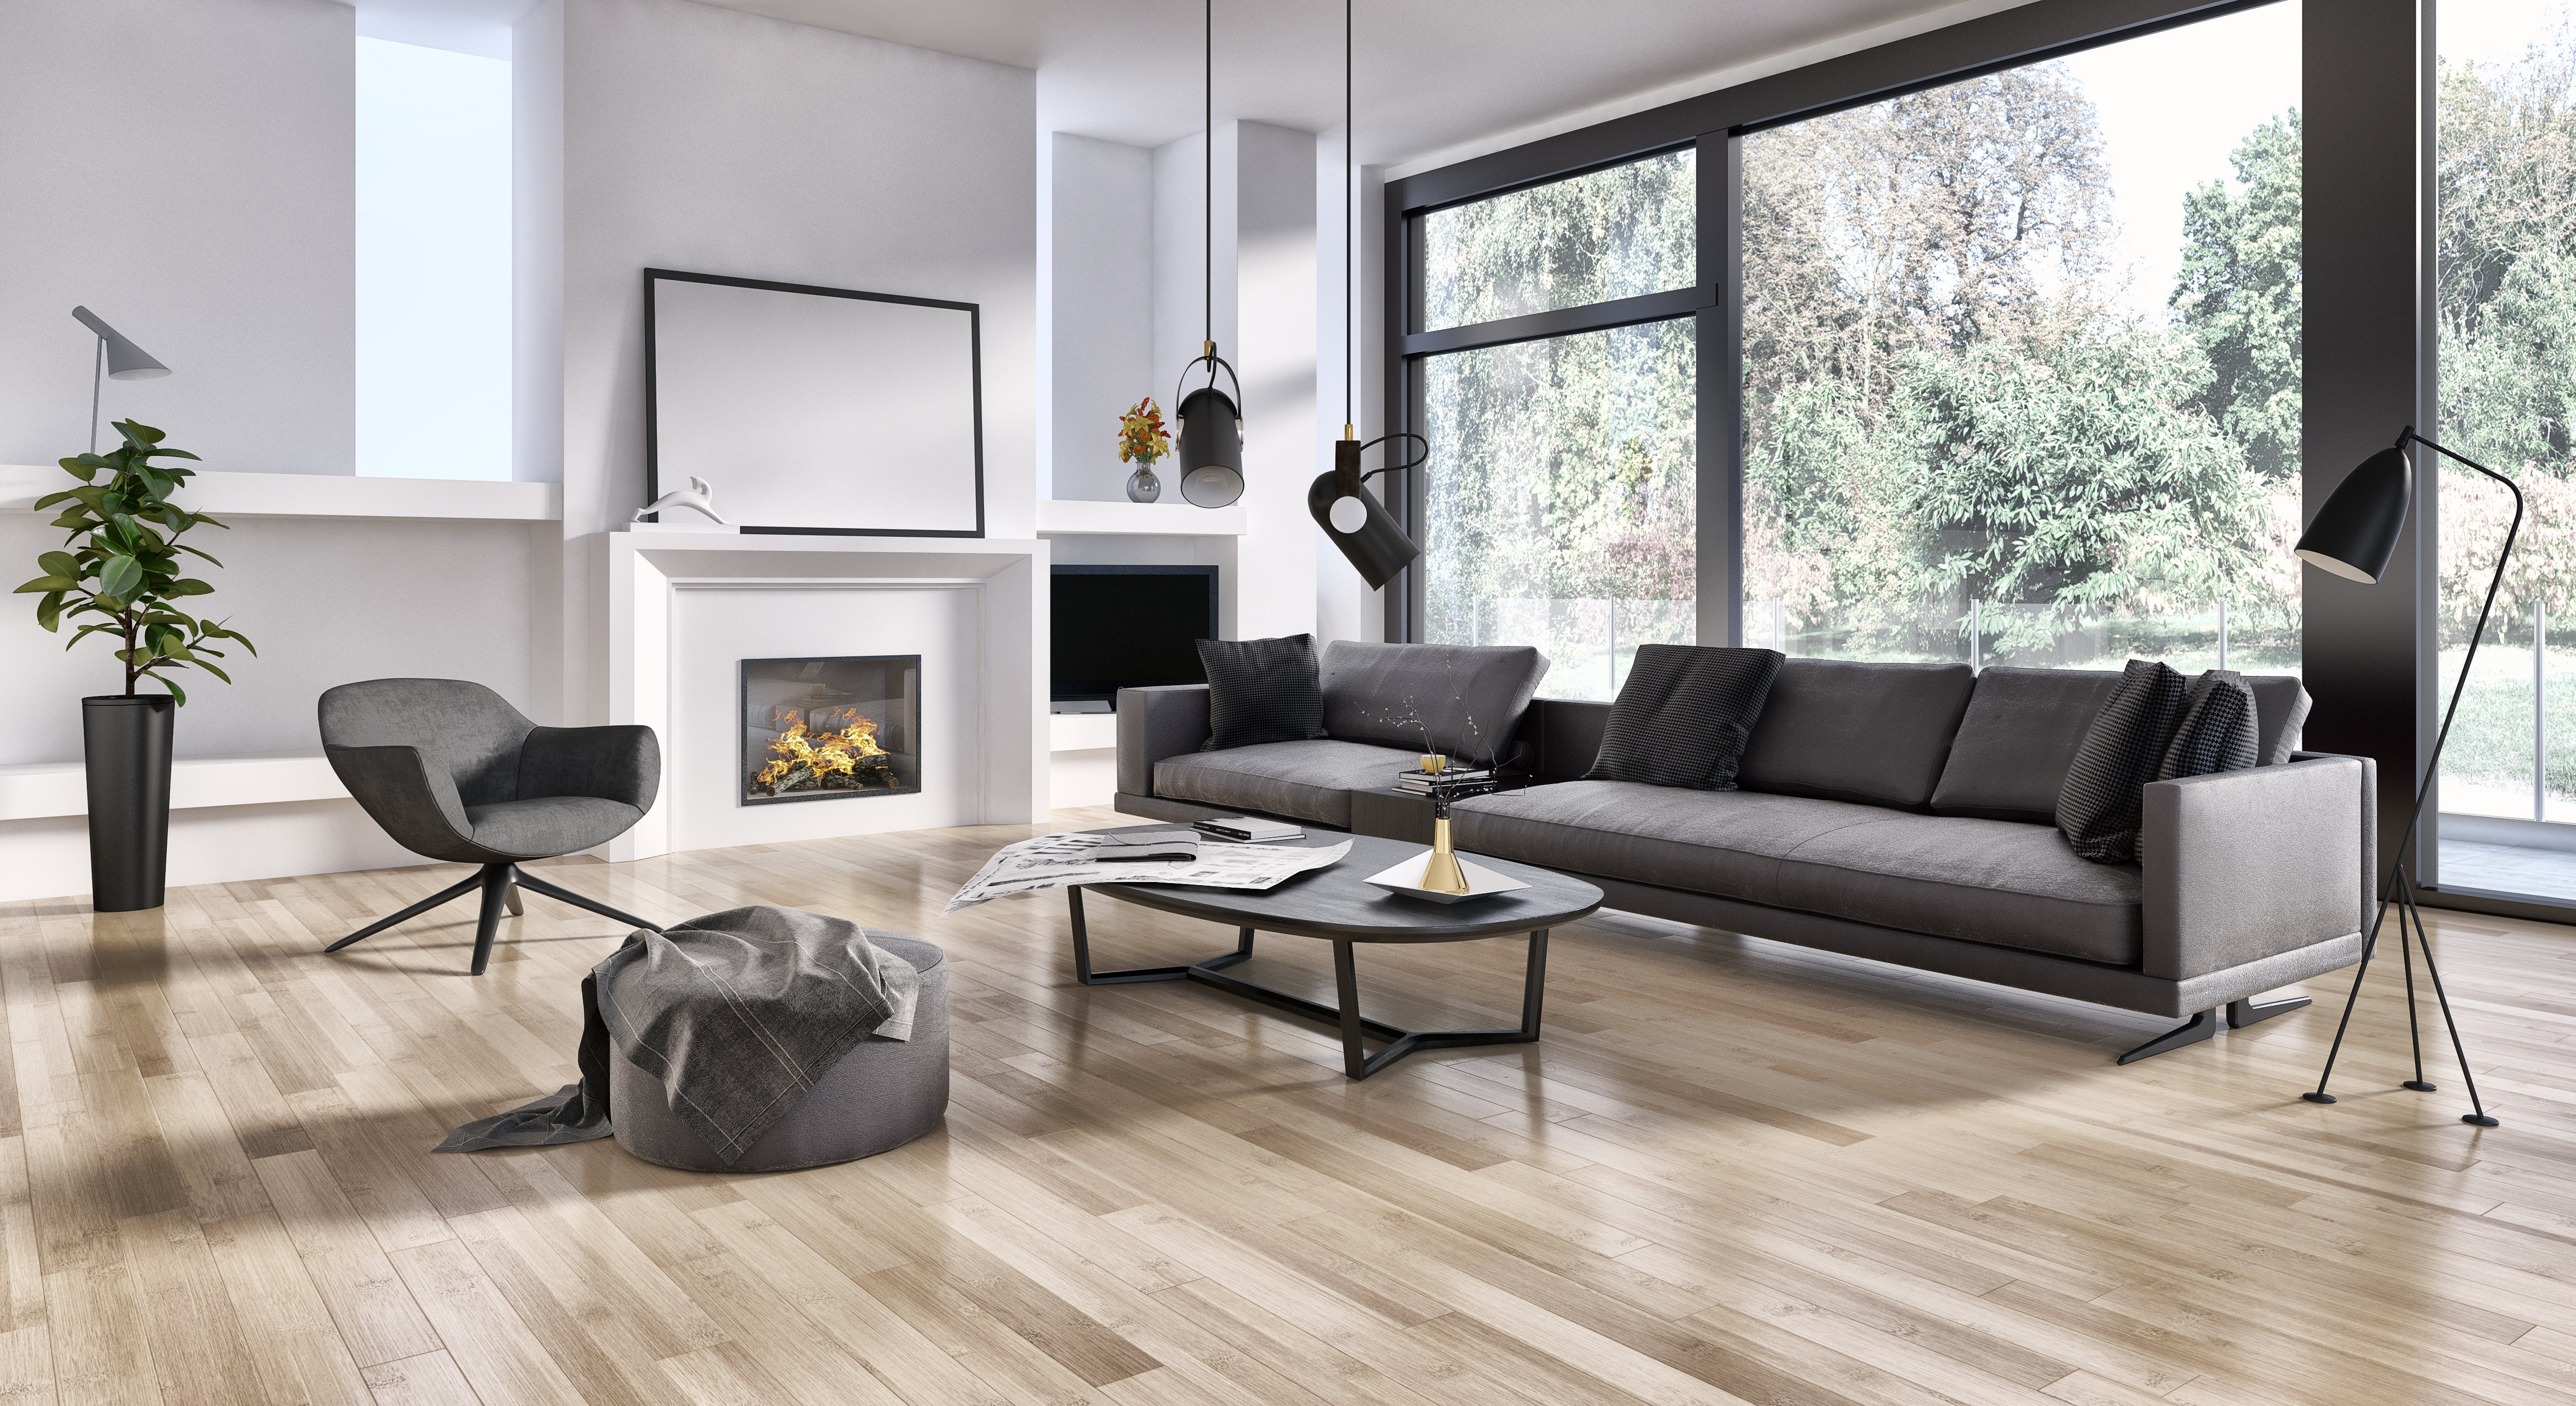 Modern living room with hardwood flooring from Success Floor Covering LLC in Oakland, MD